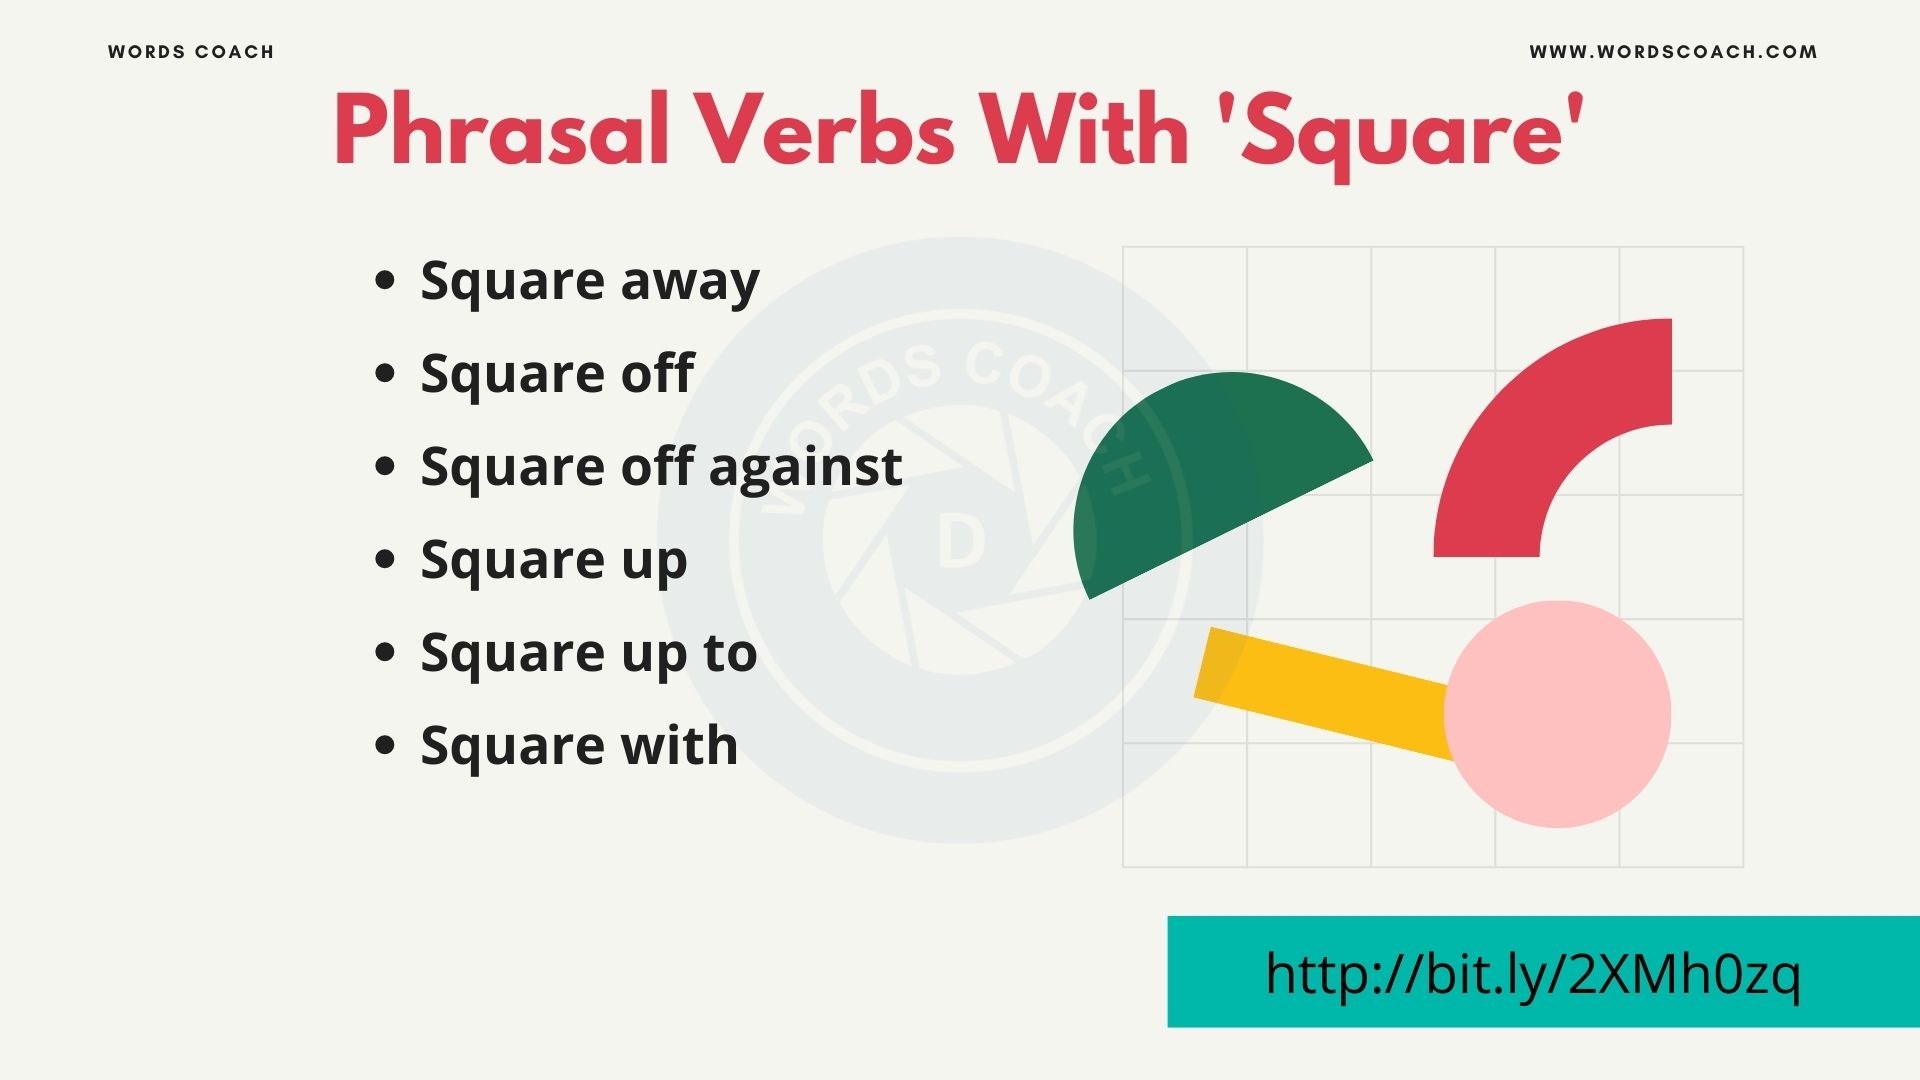 Phrasal Verbs With 'Square'